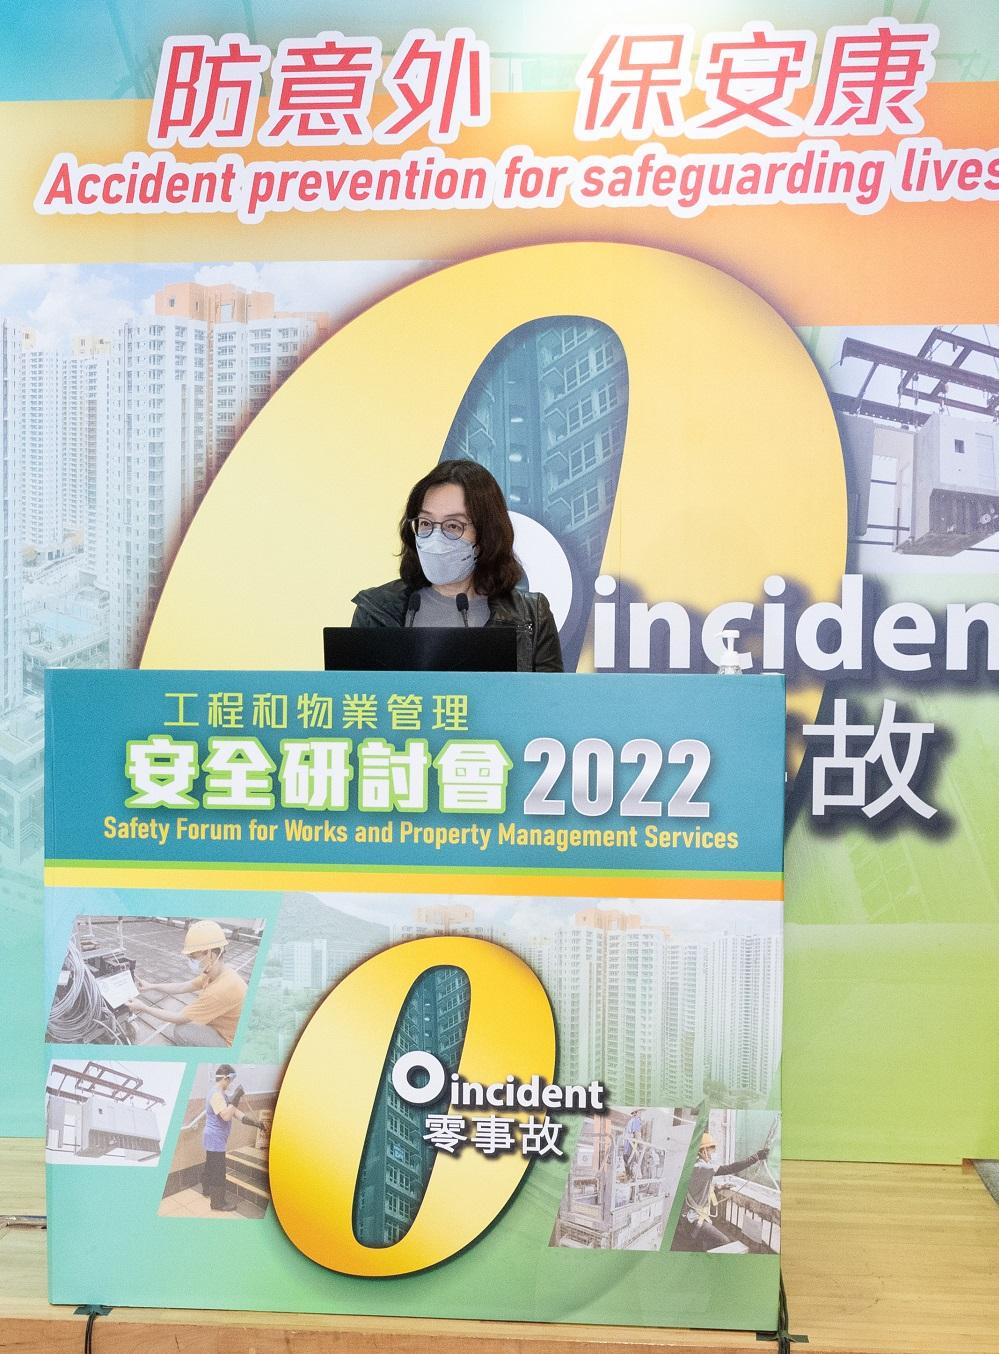 The Permanent Secretary for Housing, Miss Agnes Wong, said at the Safety Forum for Works and Property Management Services 2022 yesterday (December 6) that the Hong Kong Housing Authority will widely make use of technology such as the implementation of Modular Integrated Construction and Multi-trade Integrated Mechanical, Electrical and Plumbing for speeding up flat production as well as bolstering site safety management.


